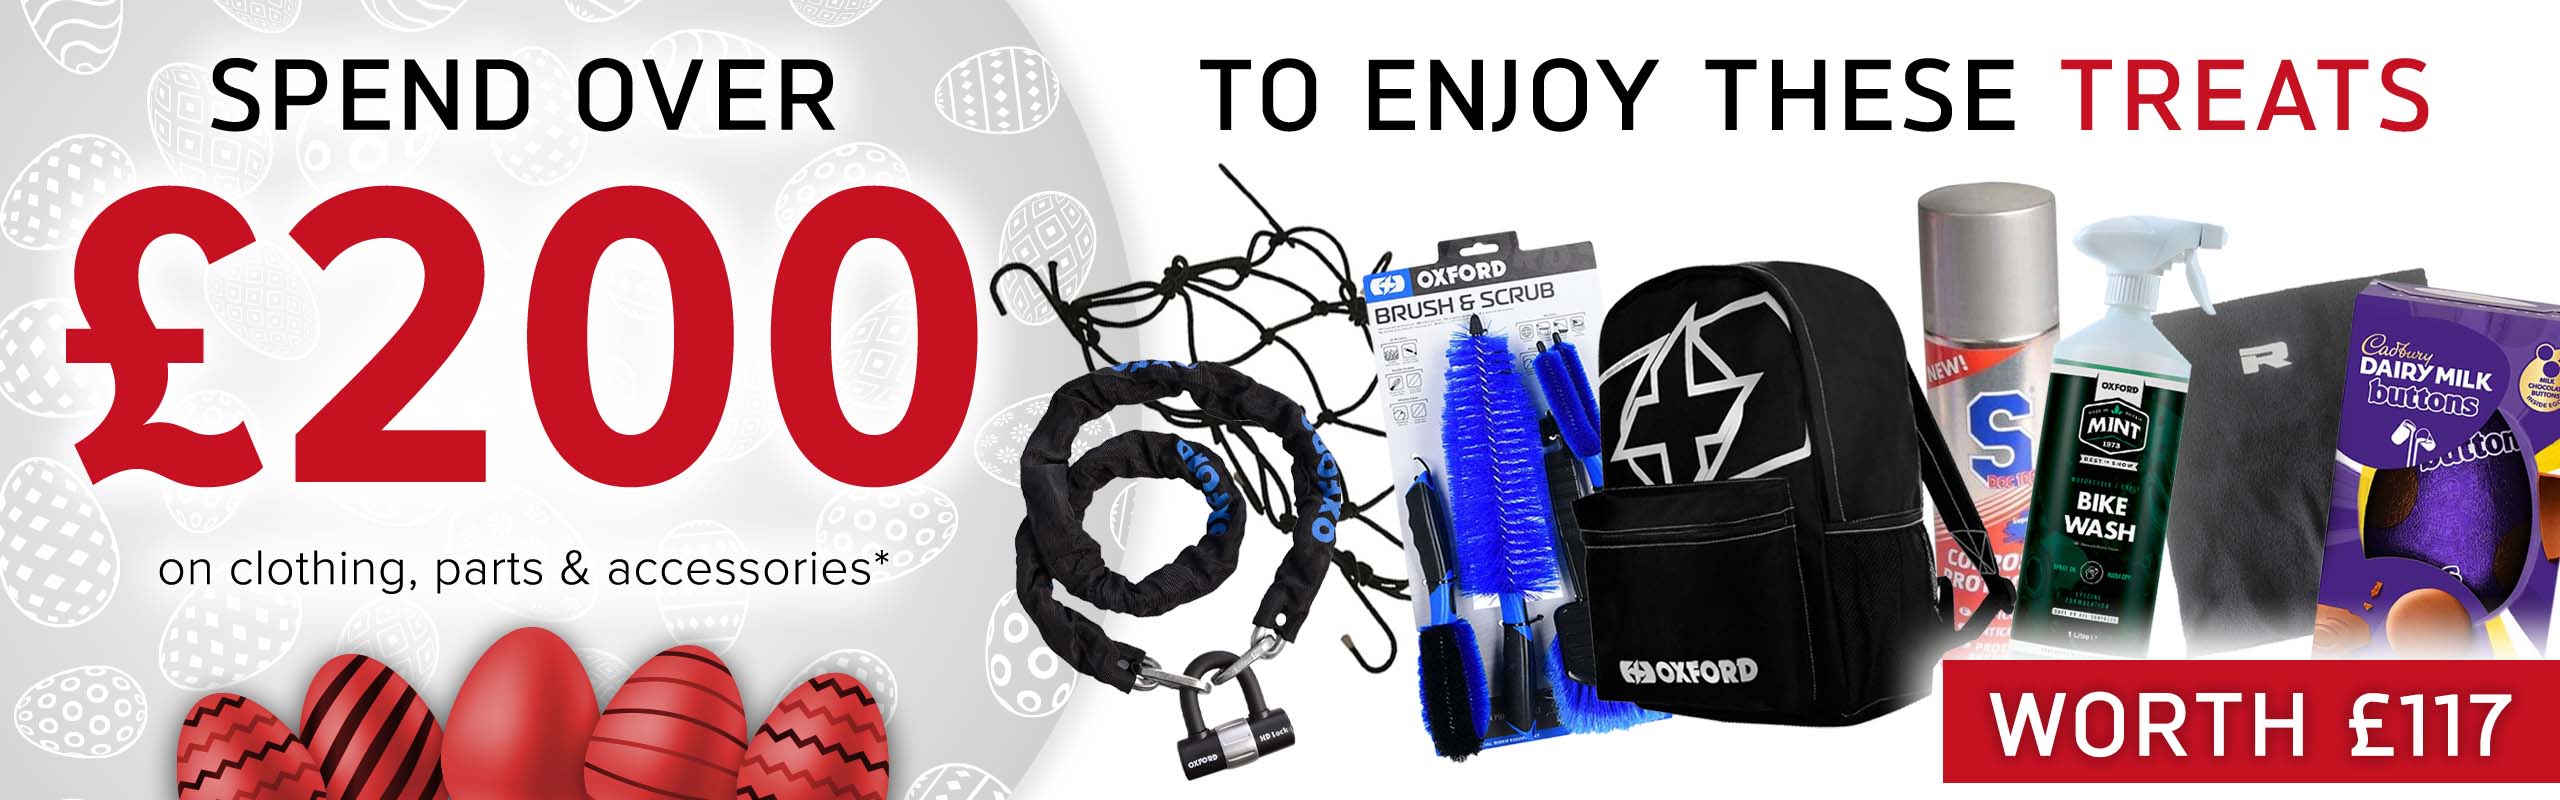 SPEND OVER £200 on clothing, parts and accessories and get THESE (An Easter egg, S Doc 100 Corrosion Protectant, and Mint Bike Wash (1l), a Richa Fleece Neck Warmer, a Luggage Cargo Net, an Oxford Brush & Scrub Set, an HD Chain & Lock (9.3mm x 1.5m), PLUS an X-Rider Essential Backpack) for FREE! (Products worth £117)